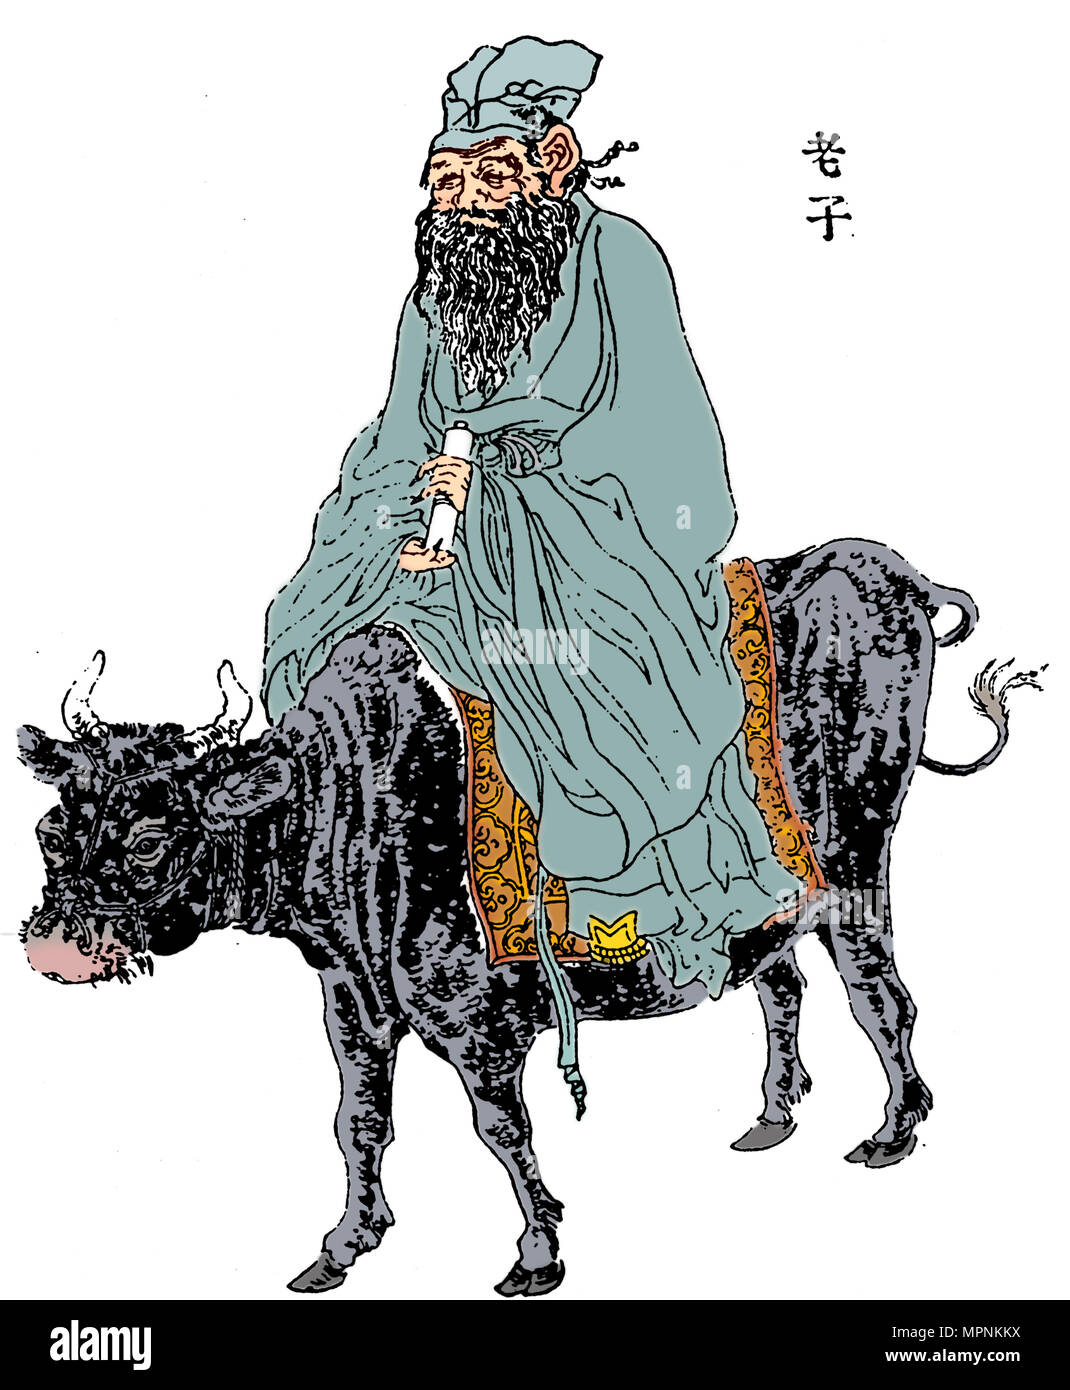 Lao-Tzu, ancient Chinese philosopher and inspiration of Taoism, late 19th century. Artist: Anon. Stock Photo